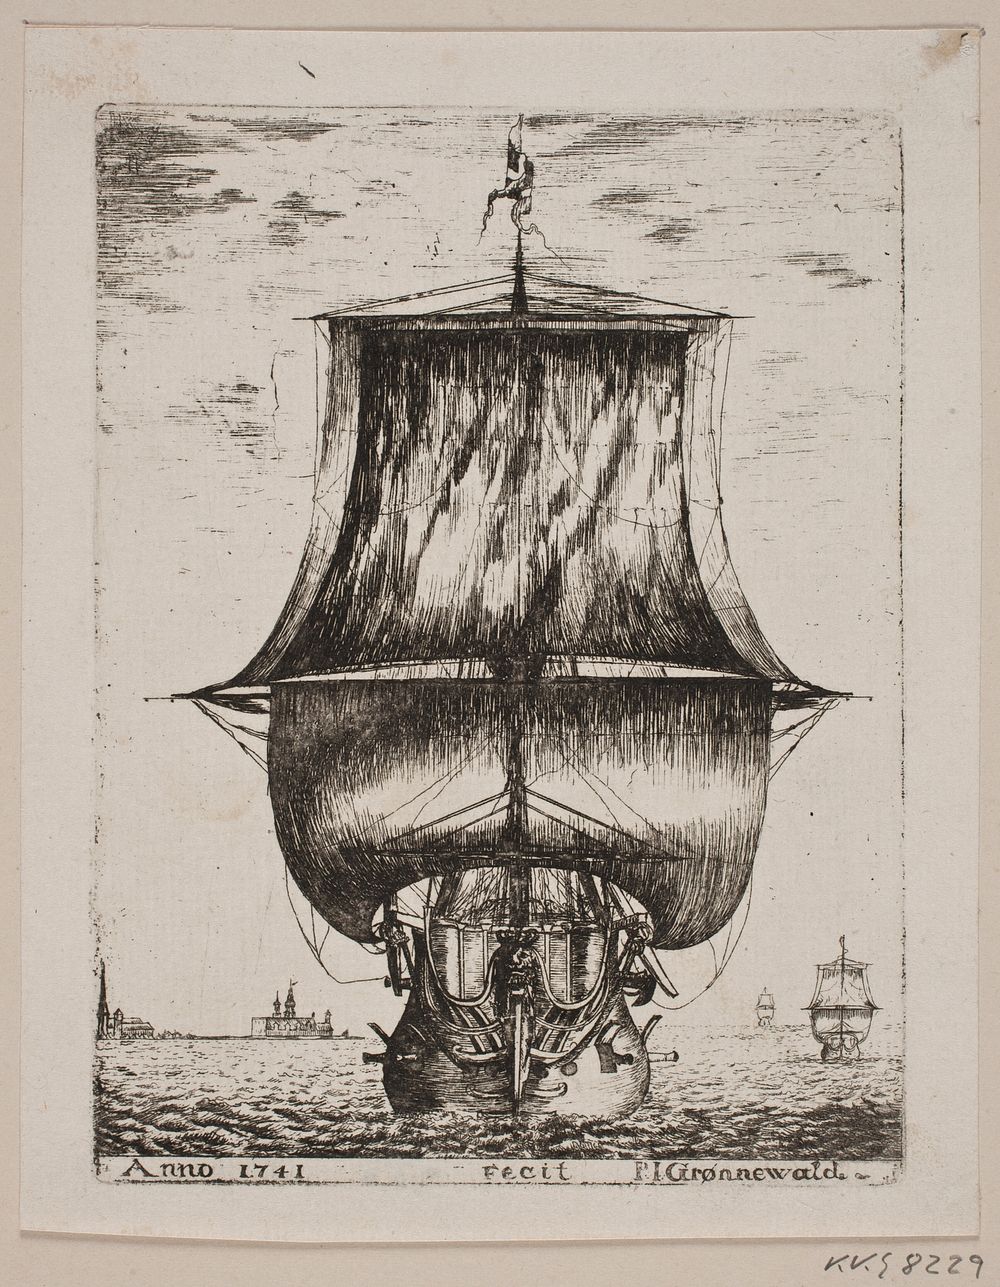 A sailing warship, Kronborg in the background by Poul Isac Gr&oslash;nvold